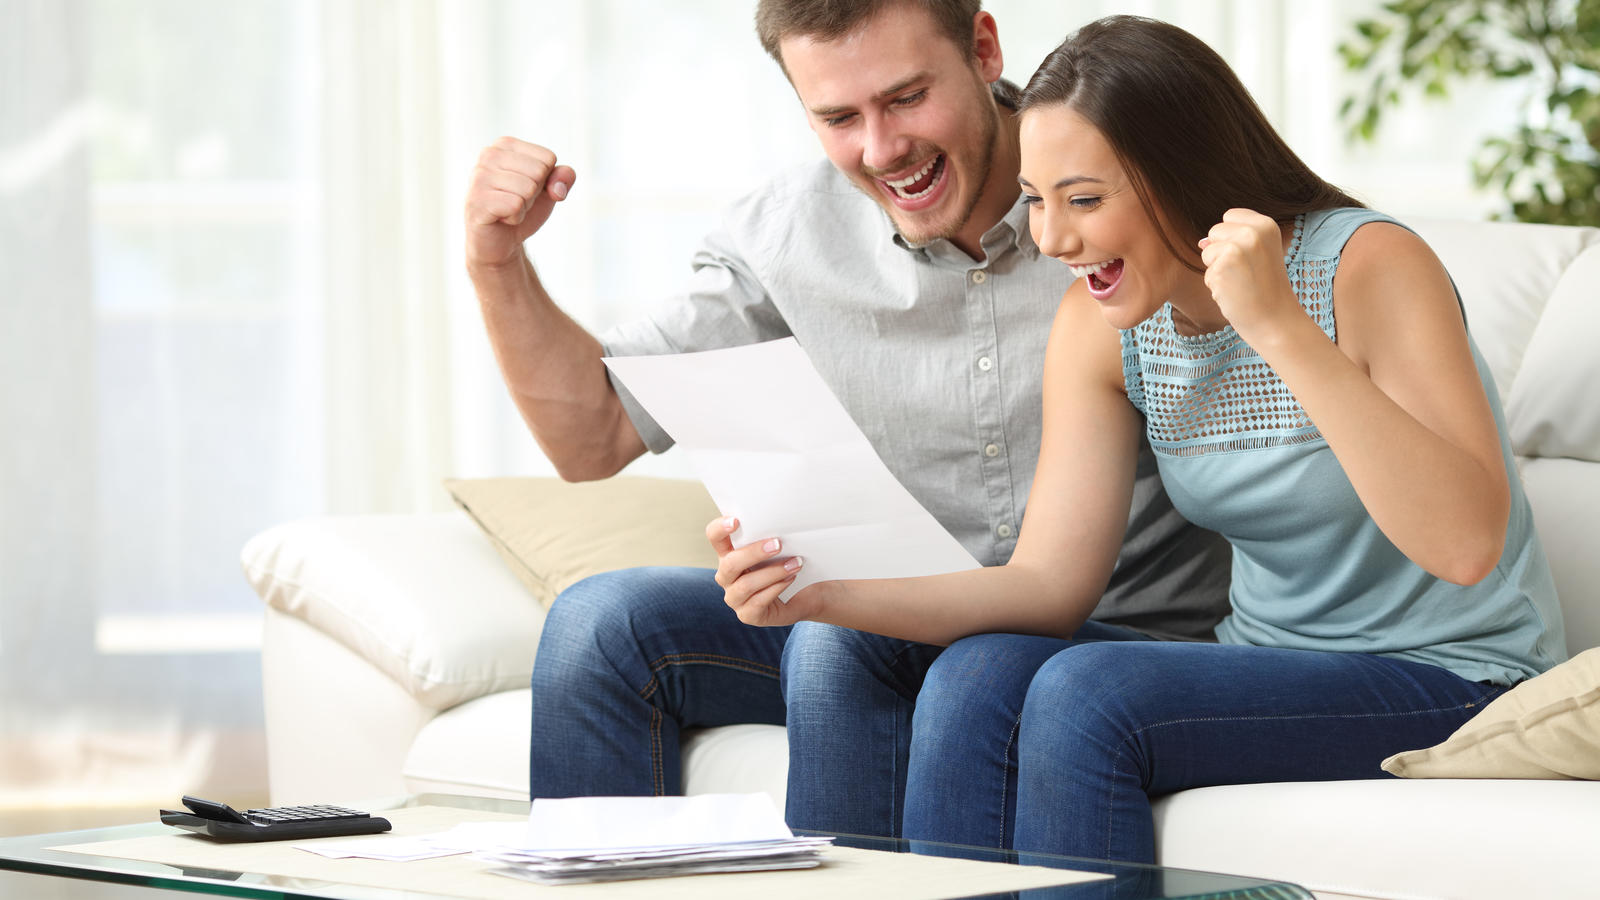 Excited couple reading a letter together sitting on a sofa in the living room at home